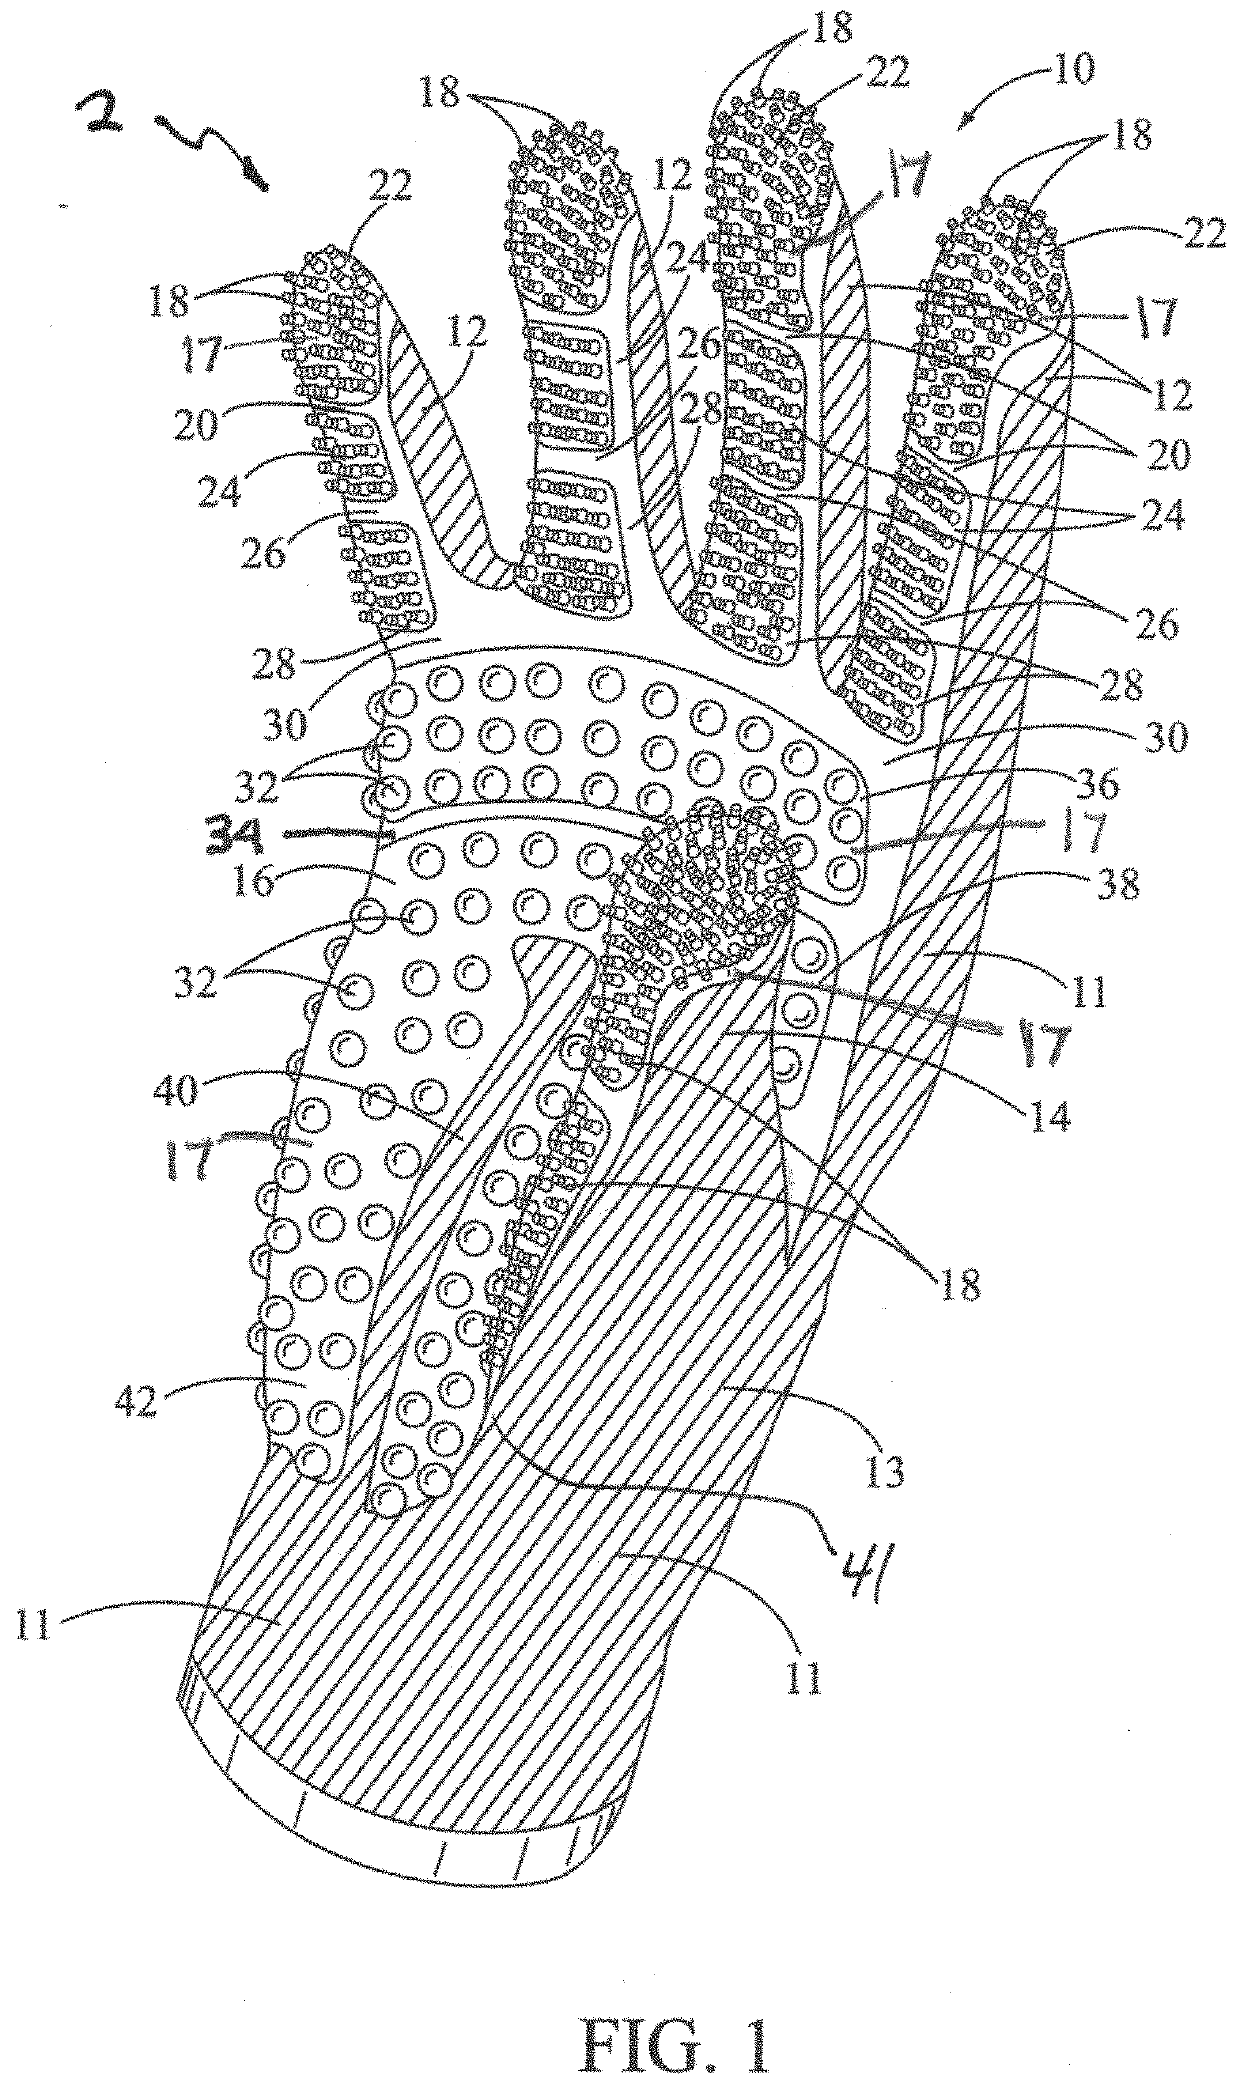 Gardening glove and method of manufacturing the same